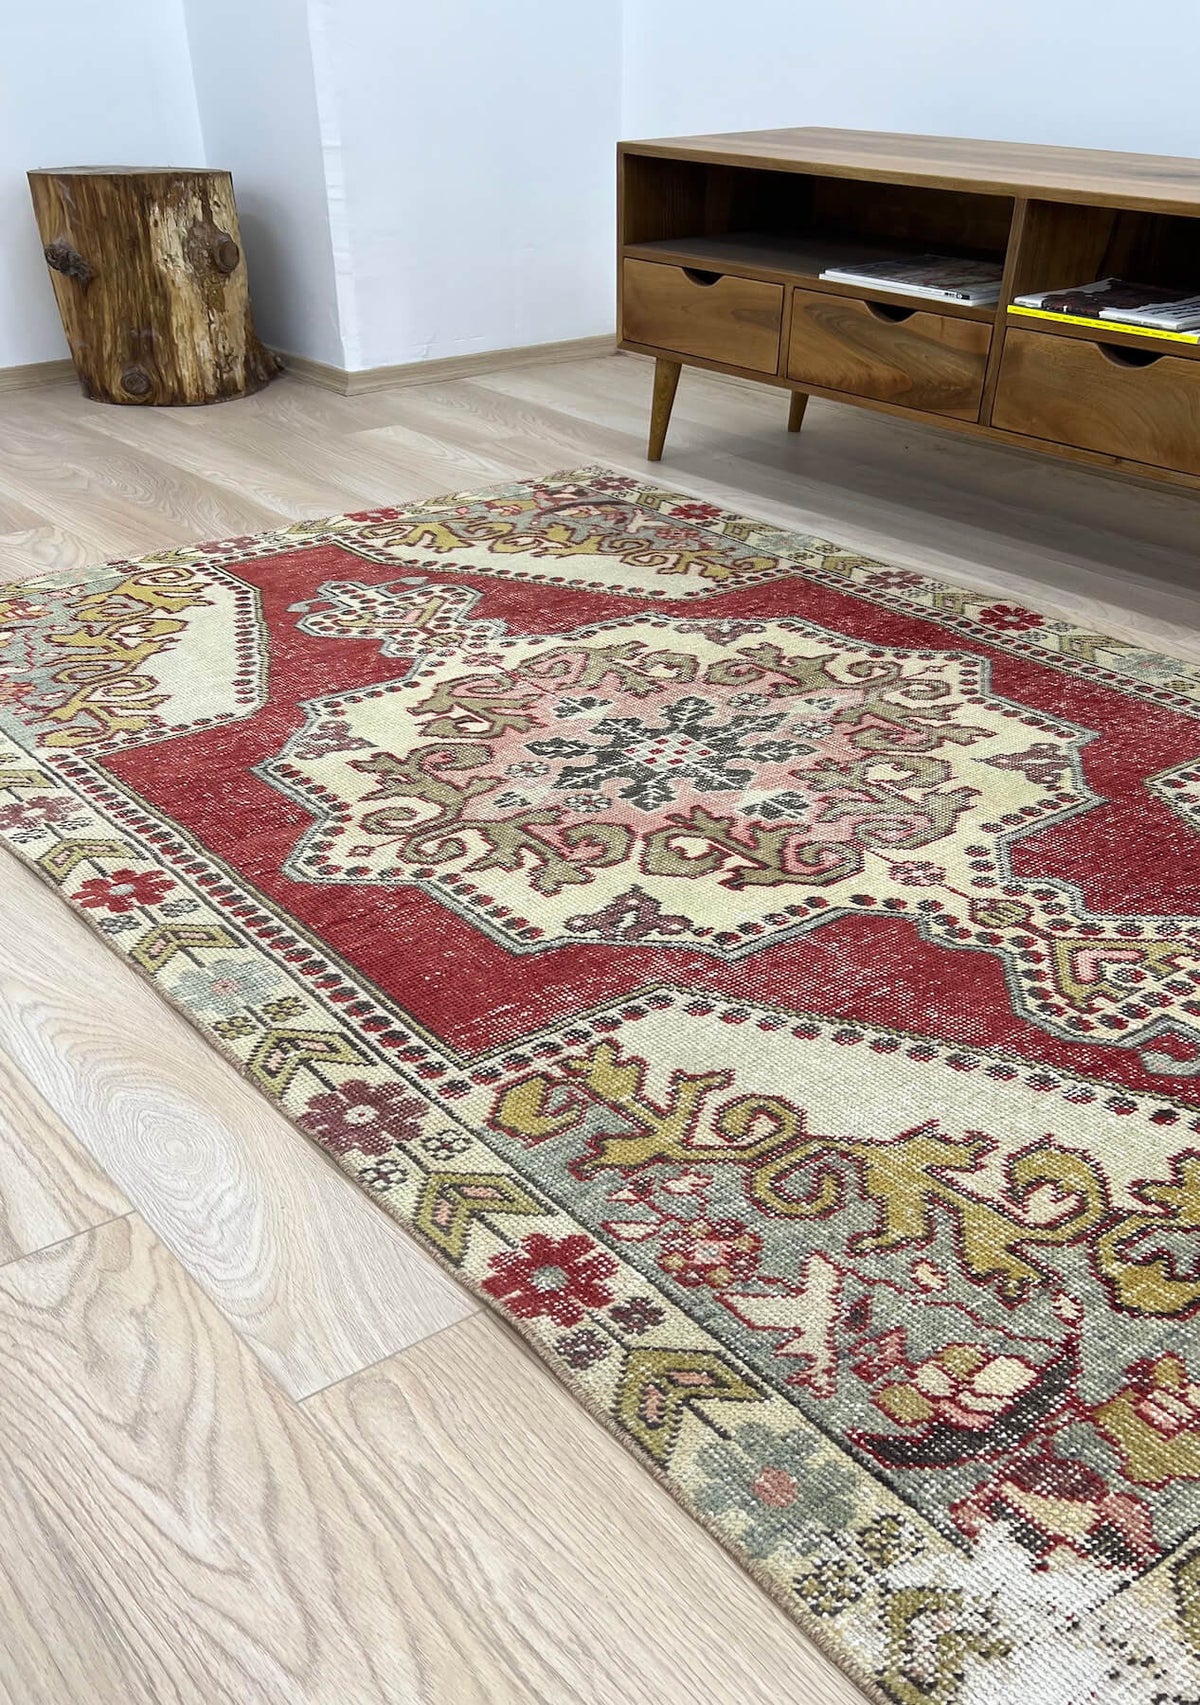 4x3 Anatolian Vintage Rug 114x94 Cm Pure Wool.unique Rug. Made by Double  Knotted Pure Wool Home Decor Bohemian Rug 